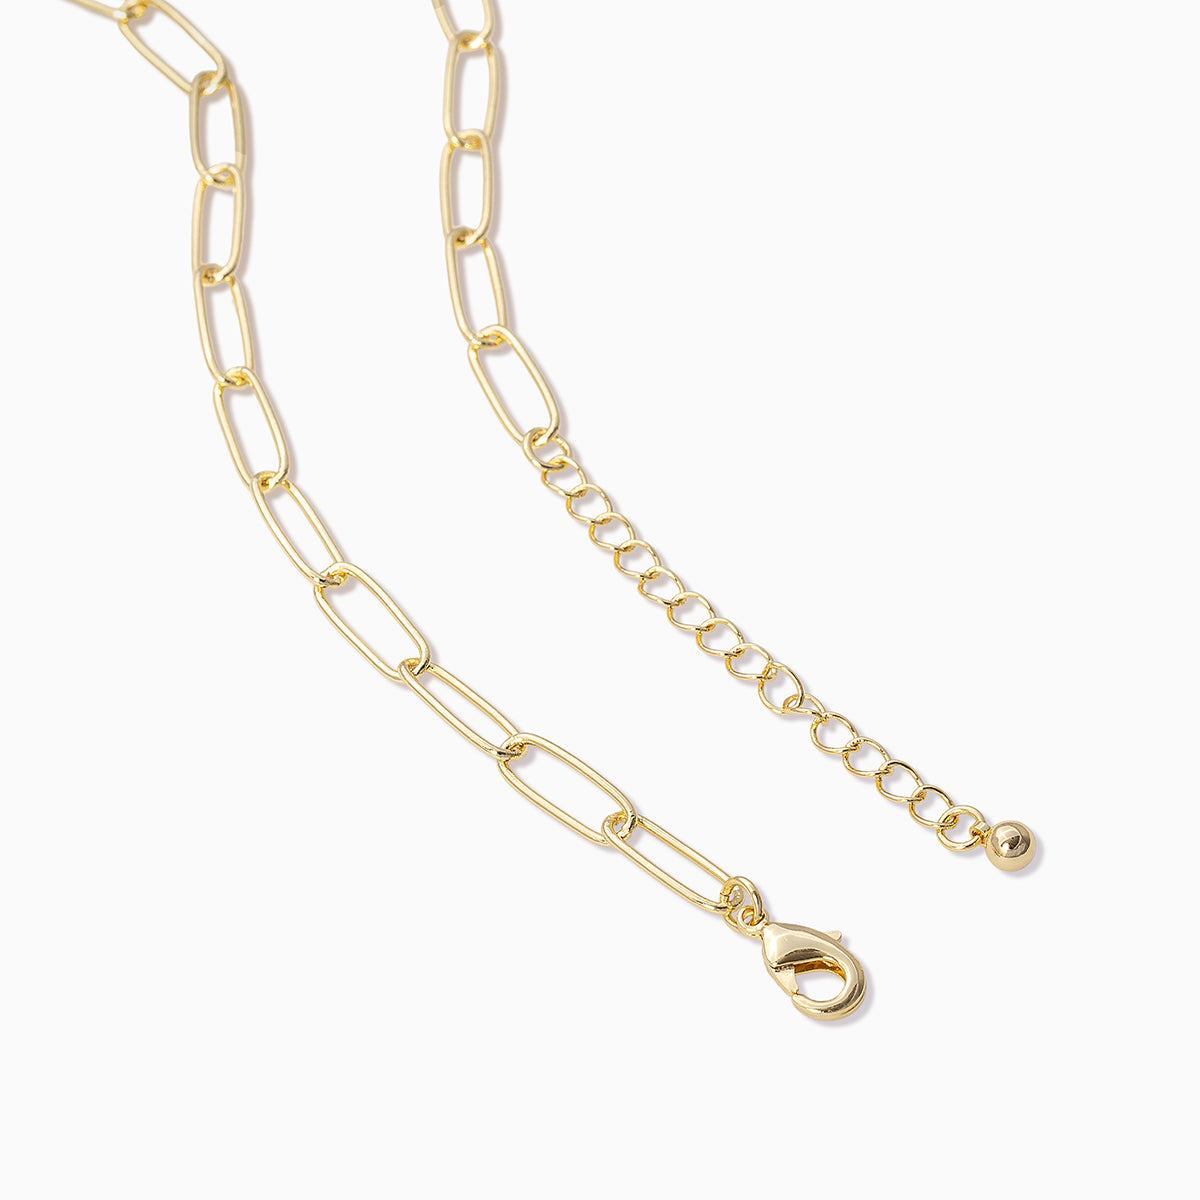 Cursive Initial Necklace | Gold A Gold B Gold C Gold D Gold E Gold F Gold G Gold H Gold I Gold J Gold K Gold L Gold M Gold N Gold O Gold P Gold Q Gold R Gold S Gold T Gold U Gold V Gold W Gold X Gold Y Gold Z | Product Detail Image 2 | Uncommon James